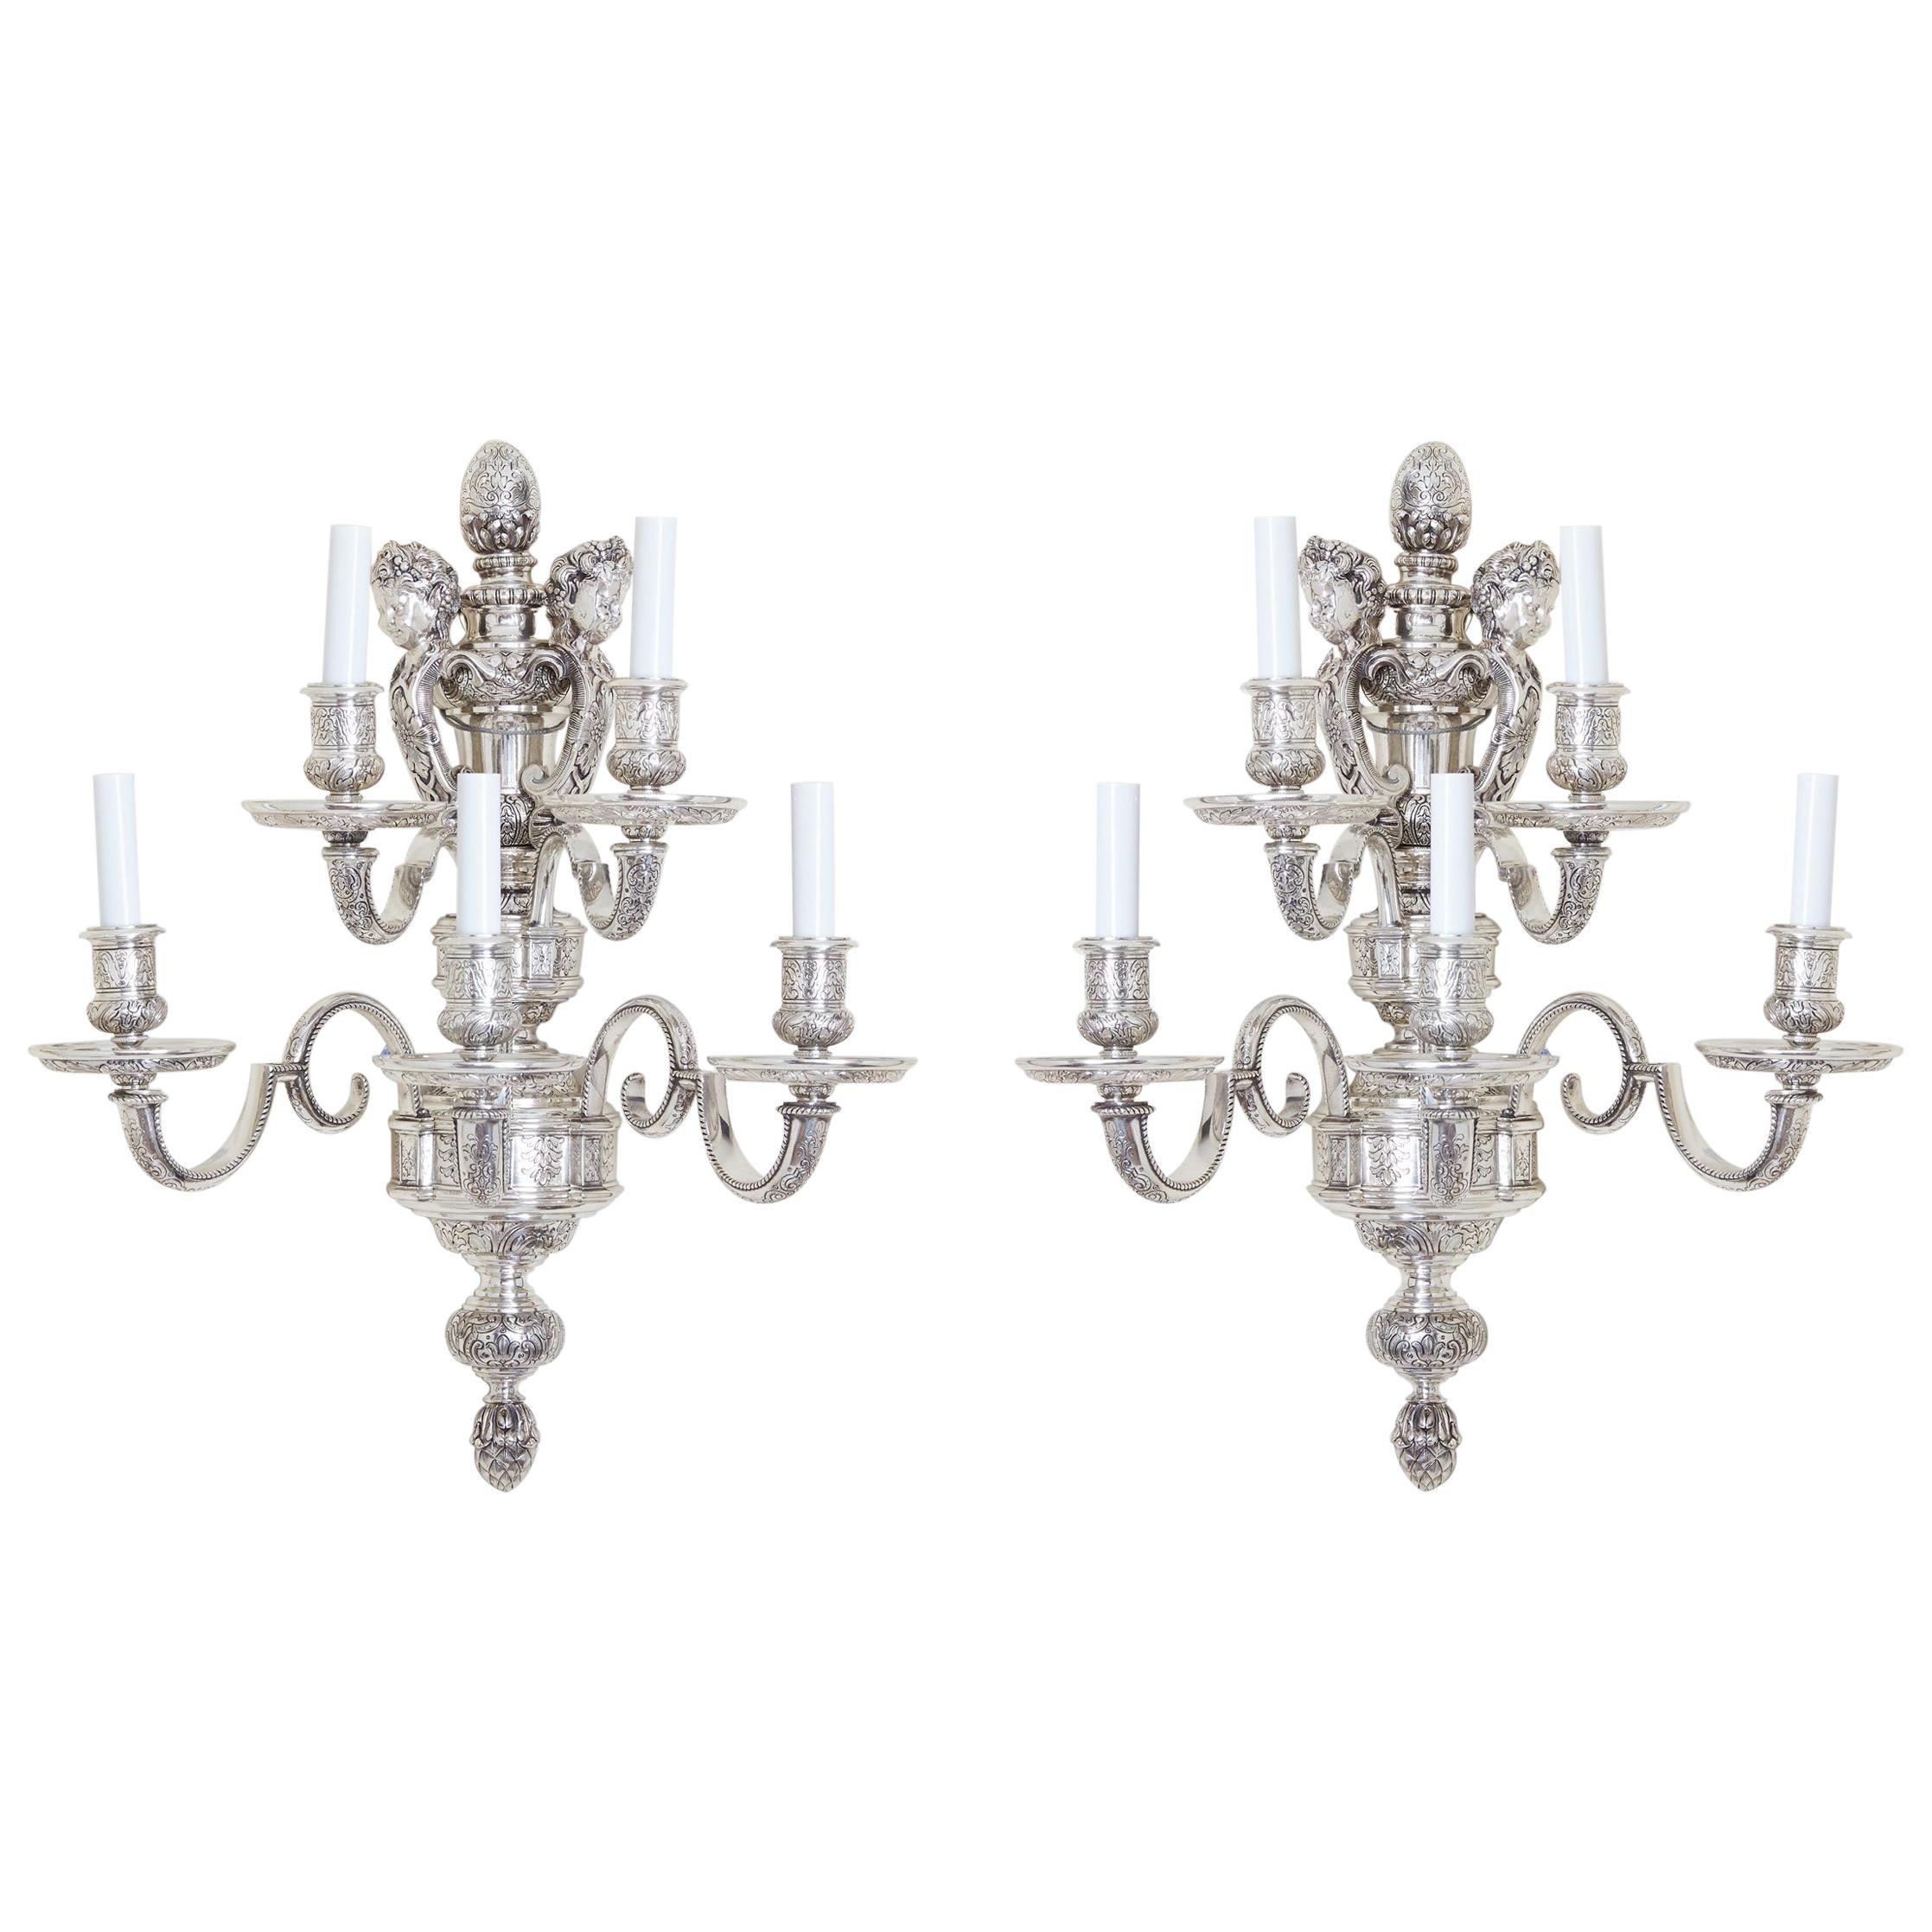 Pair of Caldwell Sconces, Five Light Sconces, Silver Nickel, 1920, Newly Wired